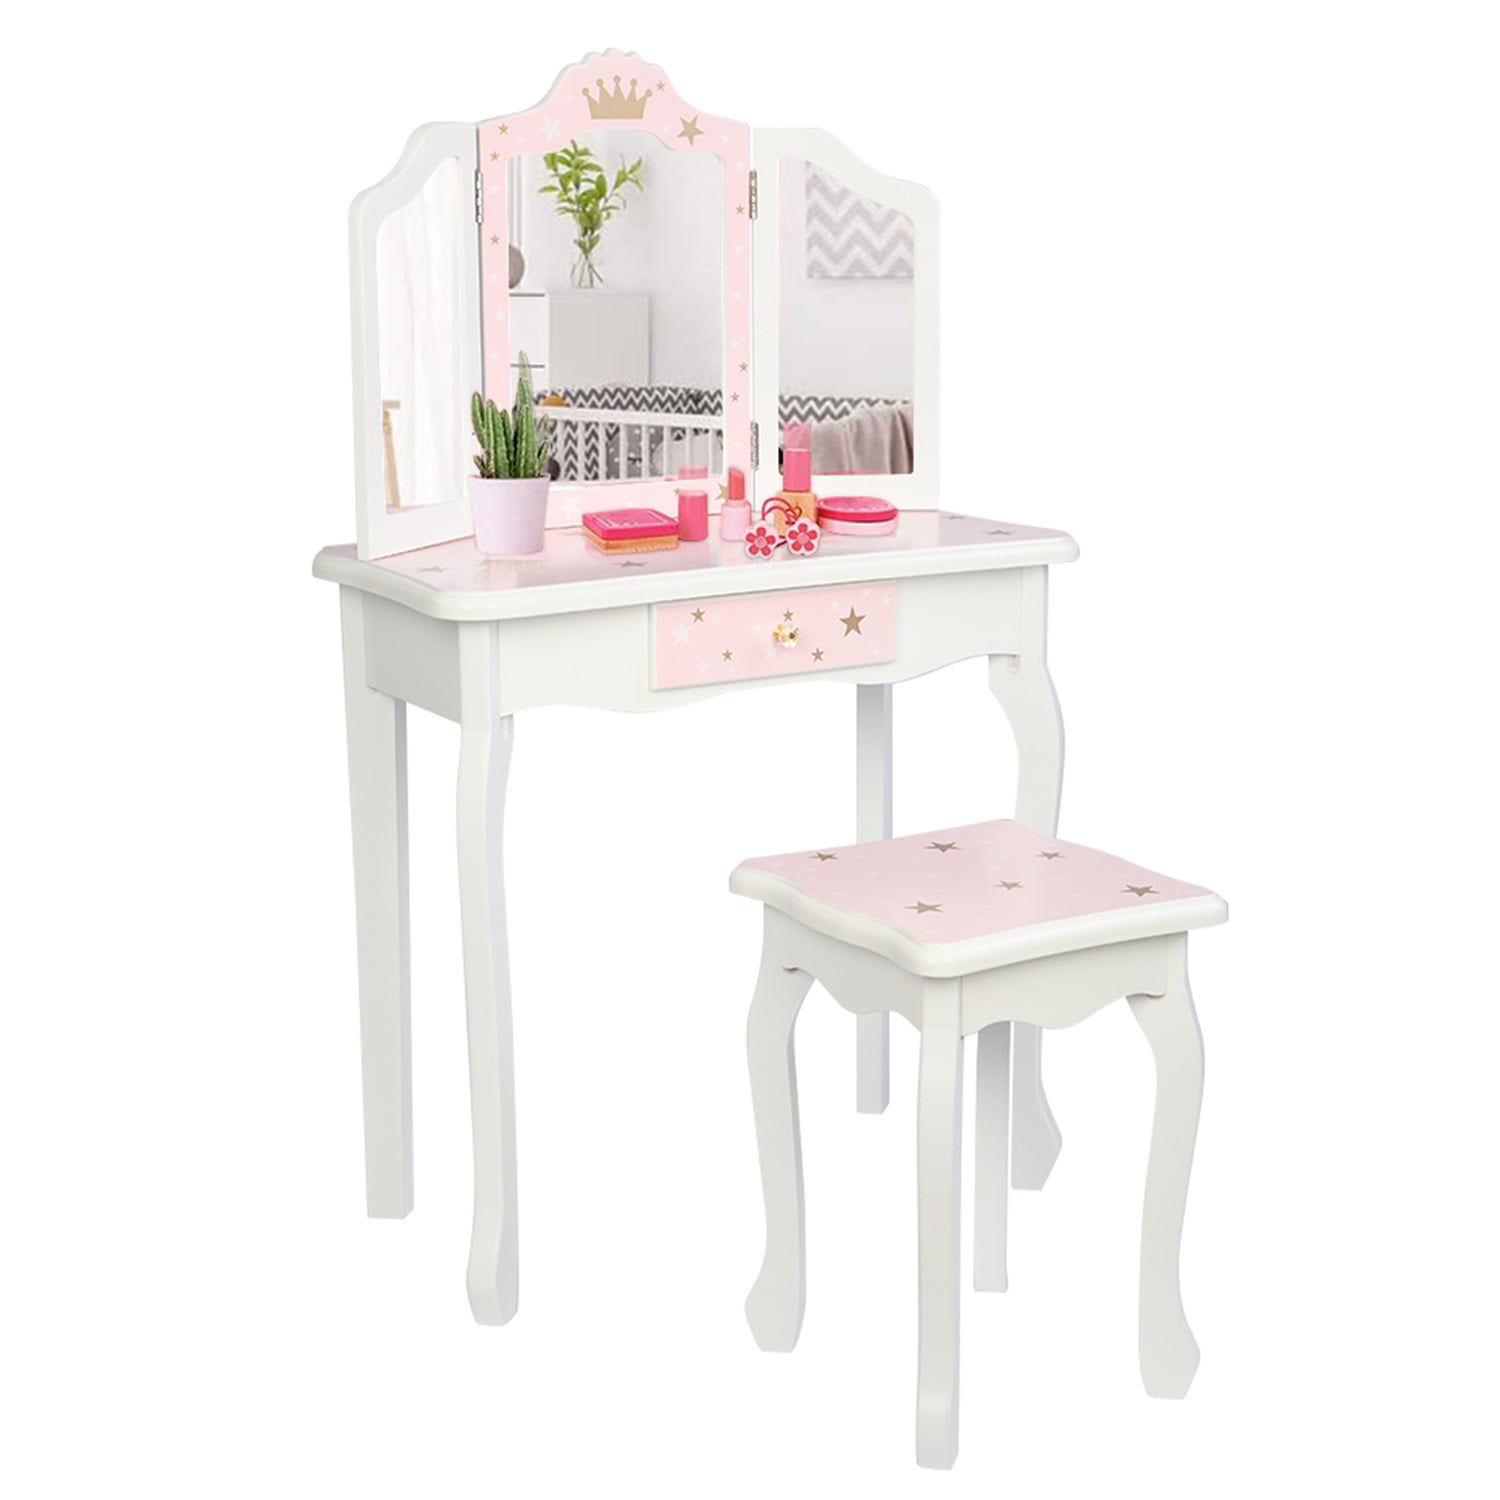 Girls Dressing Table With Stool And Mirror Heart Shape Design And Crystal Knobs Childrens White Wooden Makeup Dressing Table With 3 Drawers Small Kids Vanity Table Ideal For Girls 3 7 Years Furniture